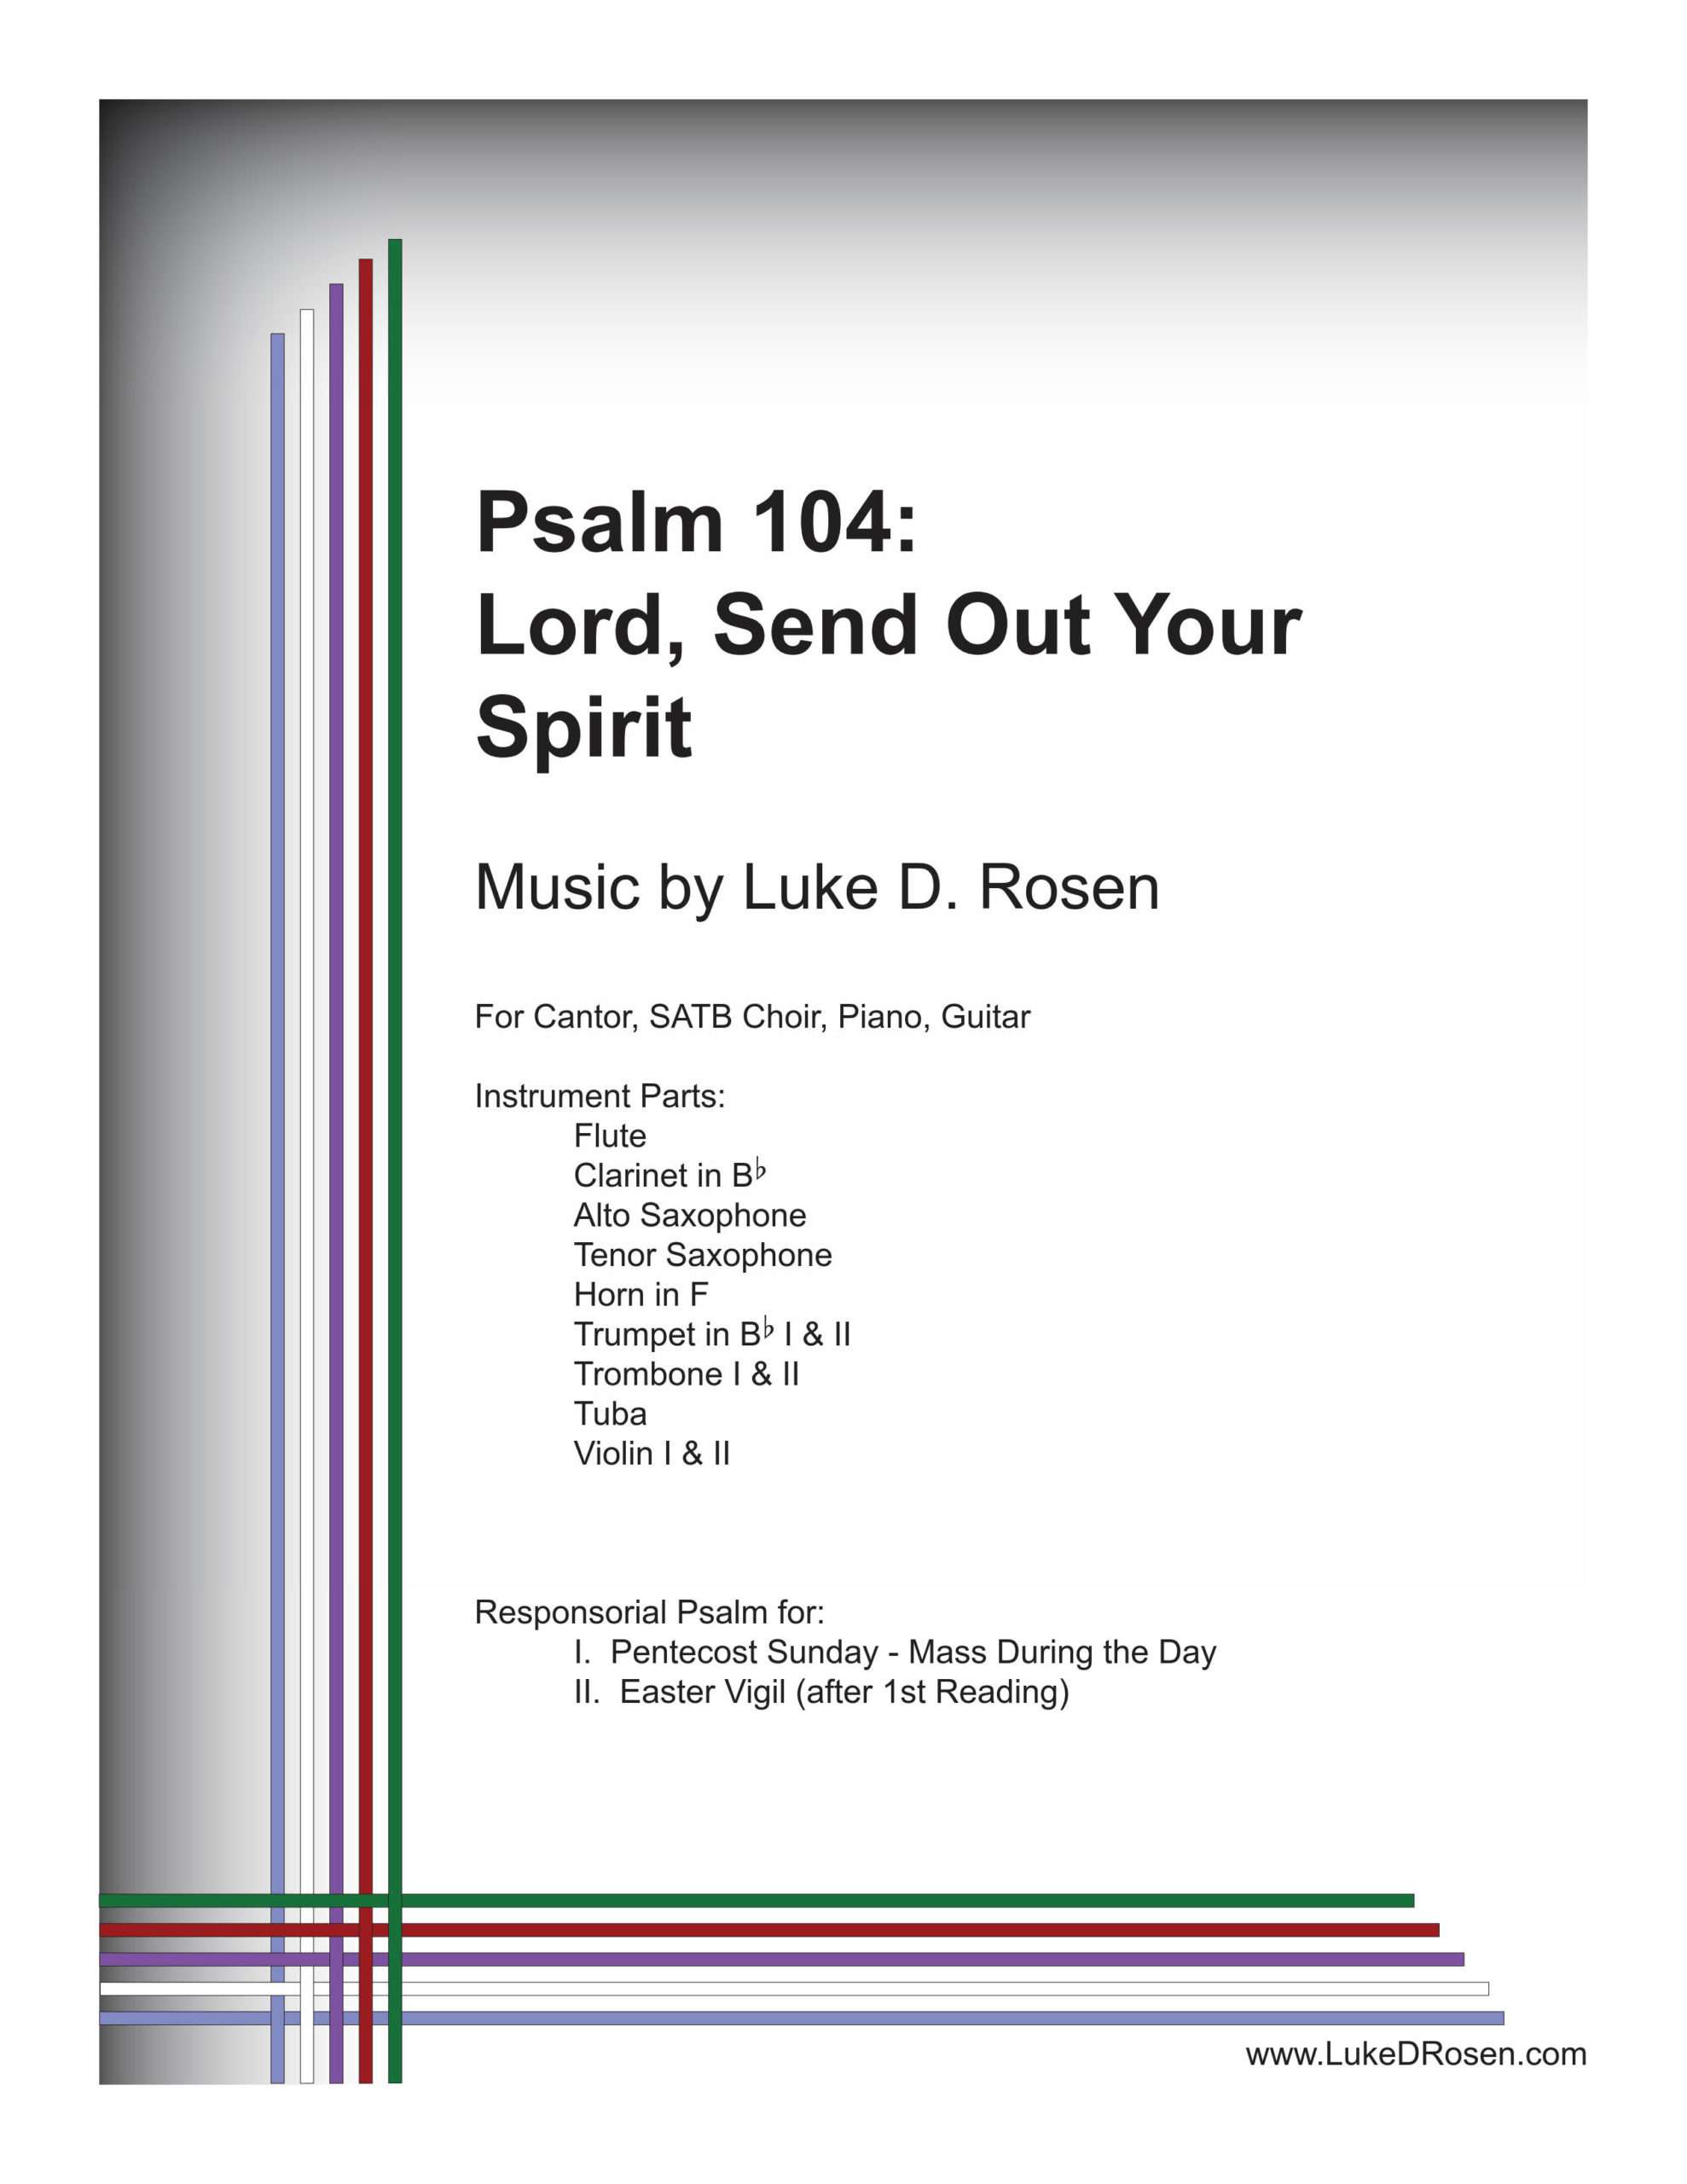 Psalm 104 – Lord, Send Out Your Spirit (Rosen)